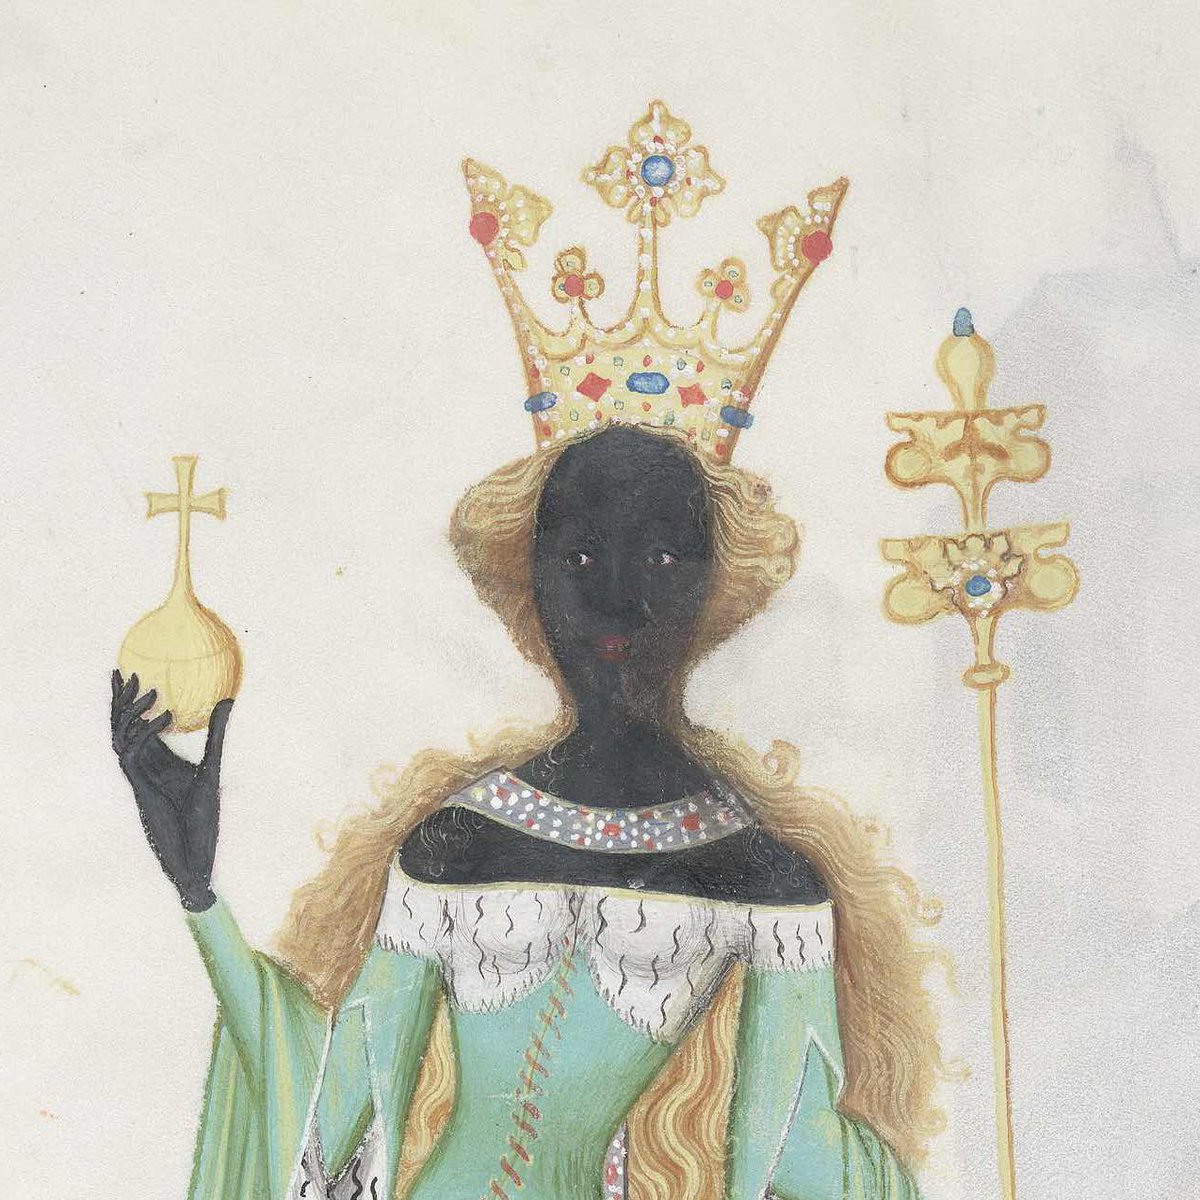 Inspired by  #BlackHistoryMonth2020 & James IV's 'Moorish Lassies', this month's blog looks at the 'Black Lady' Tournaments of 1507 & 1508 + other evidence of #Africans in the #ScottishBorders & #Northumberland up to & including the 16th C. #AncestryHour bordersancestry.com/blog/evidence-…